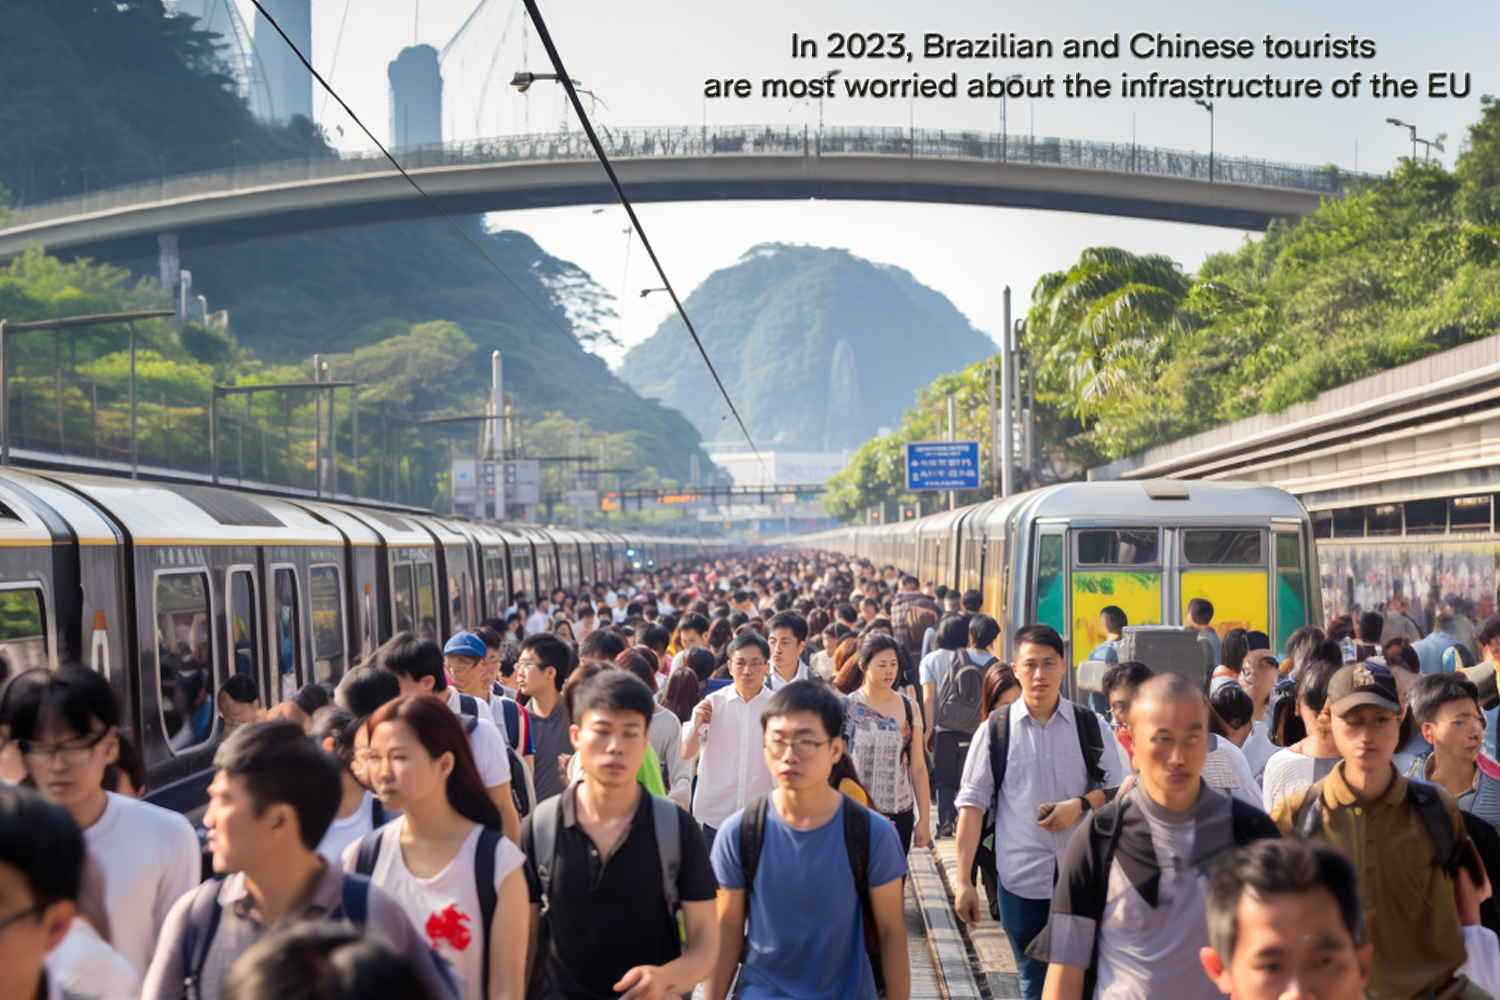 In 2023, Brazilian and Chinese tourists are most worried about the infrastructure of the EU.